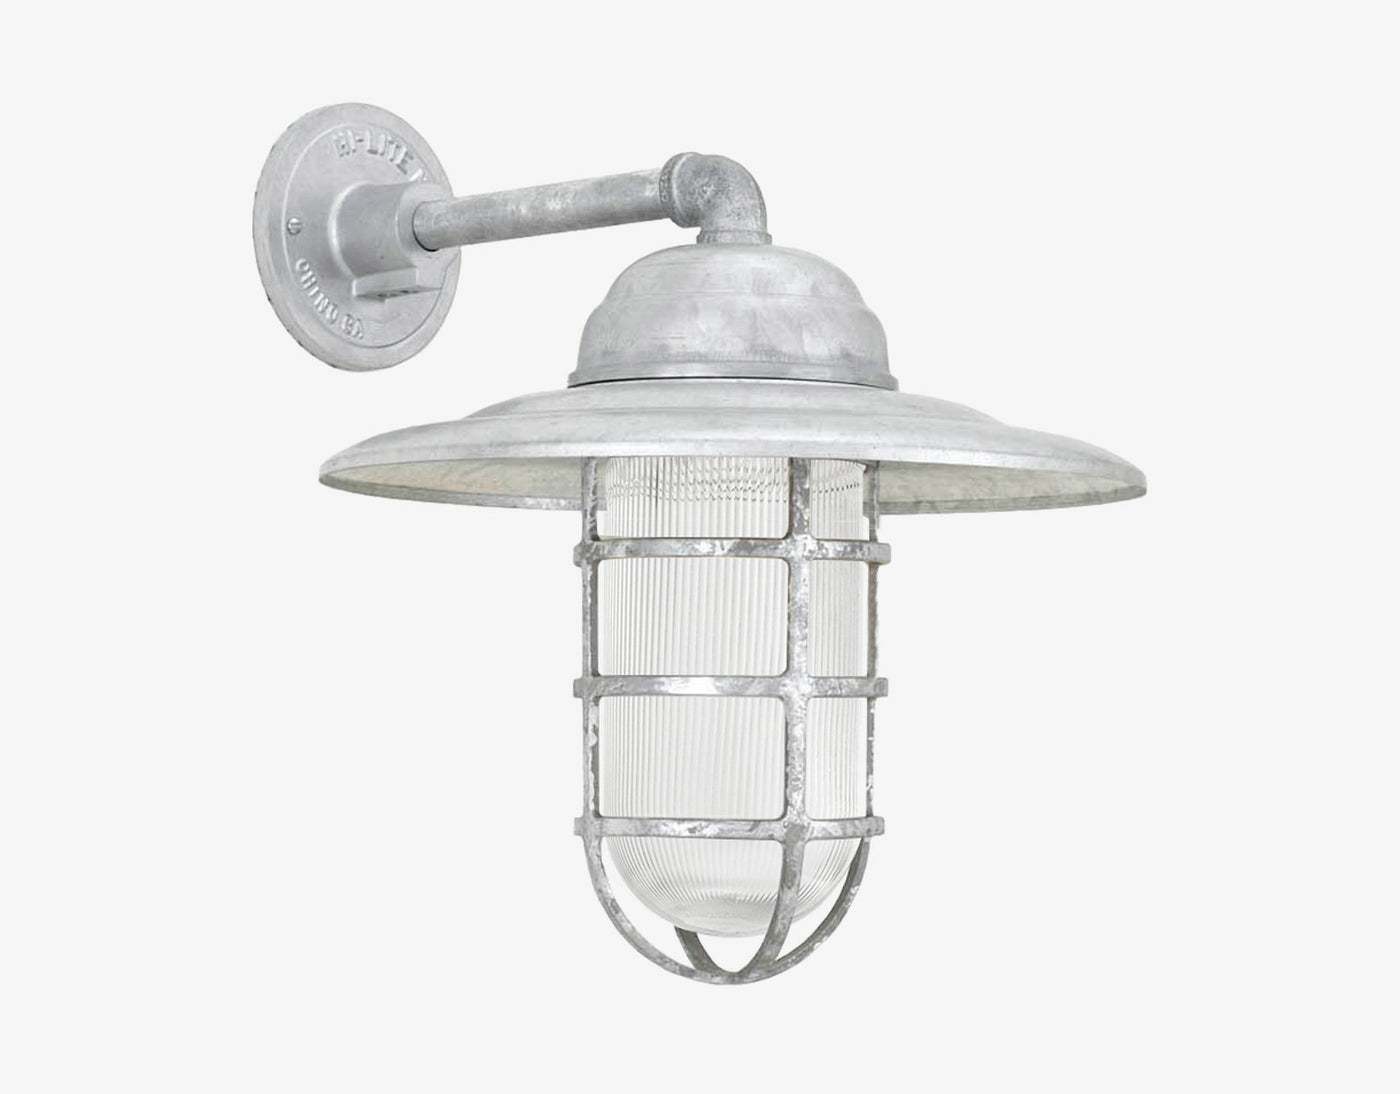 Hi-Lite Saucer Vapor Tight Jar Sconce - Galvanized/Large (shown with ribbed glass and shade)